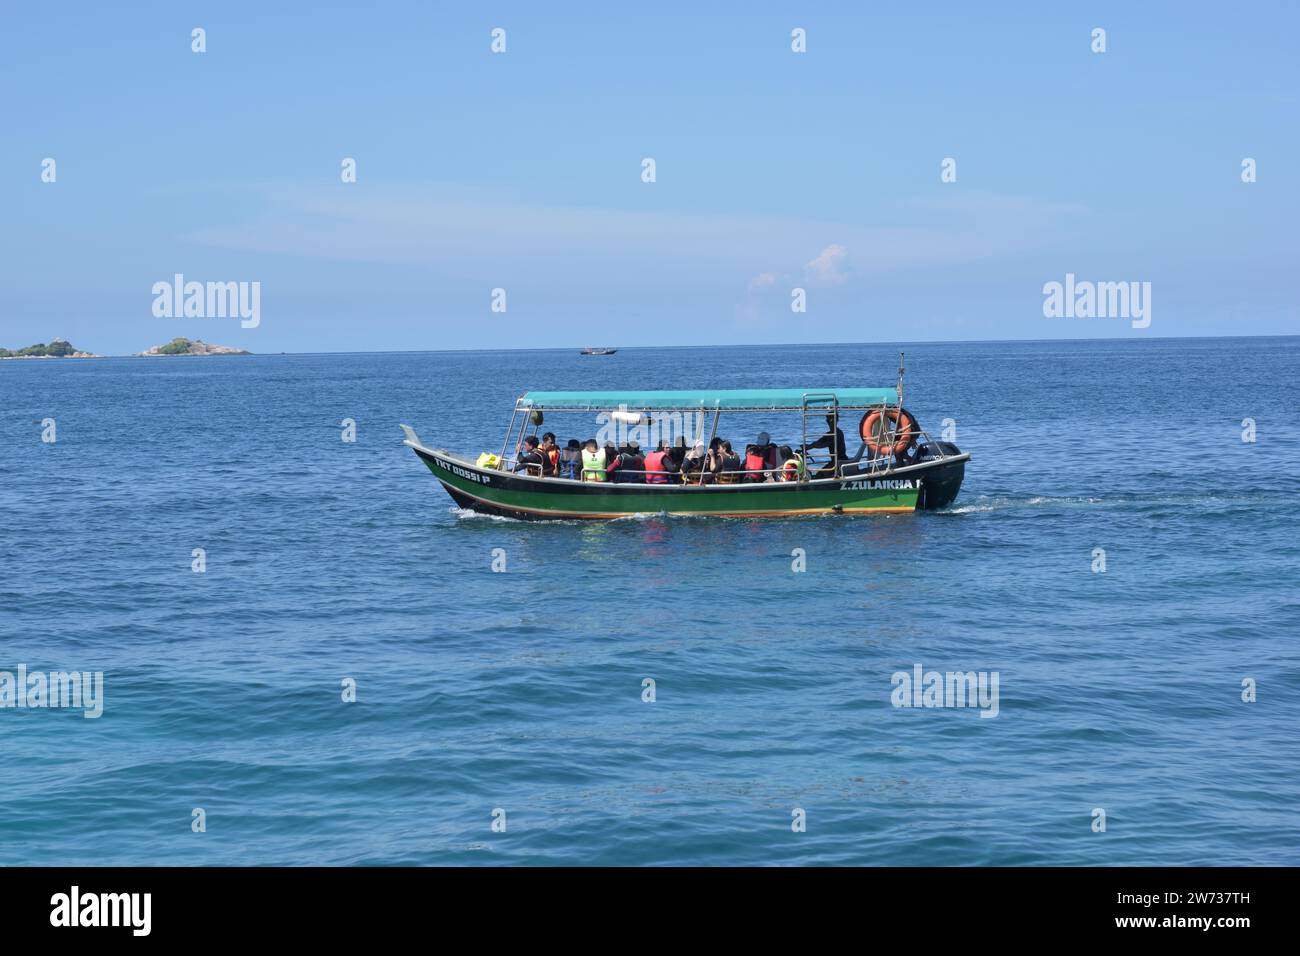 tourist boat on snorkelling trip surround island hoping, travel and tourist activities, perhentian island, tourism Stock Photo